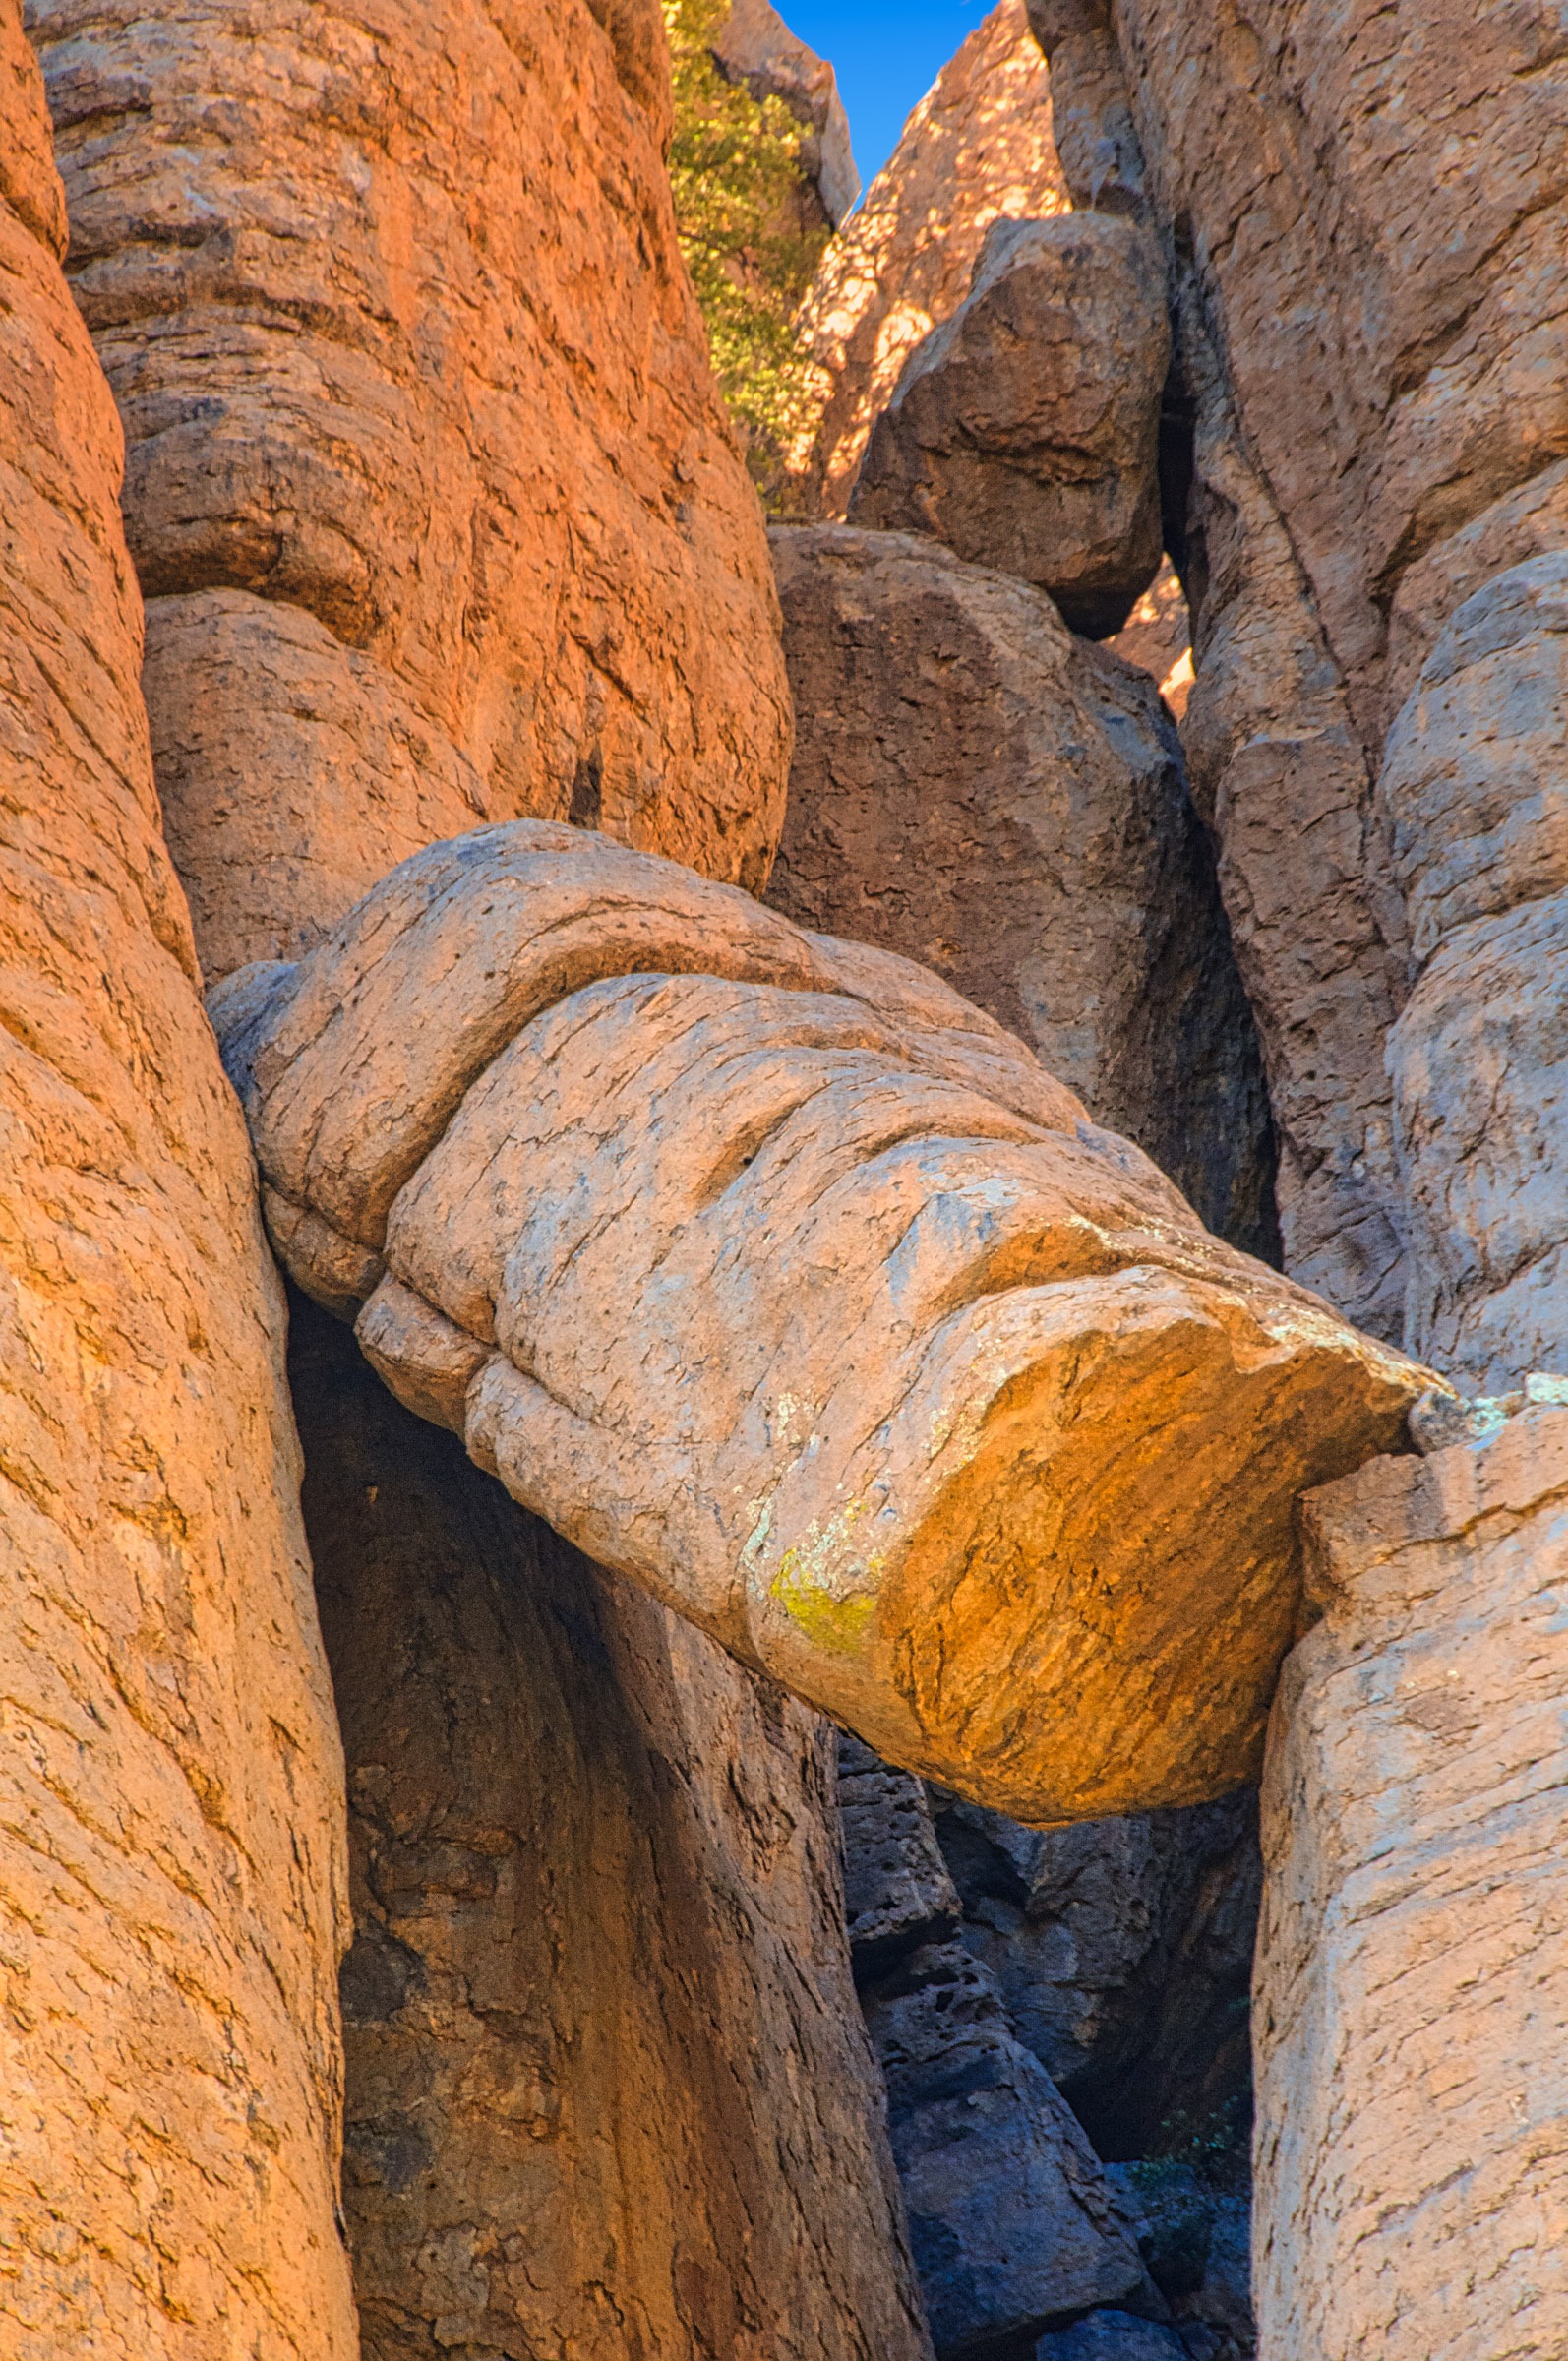 A broken column of Rhyolite Canyon Tuff that makes up the Organ Pipe formation in Chiricahua National Monument.